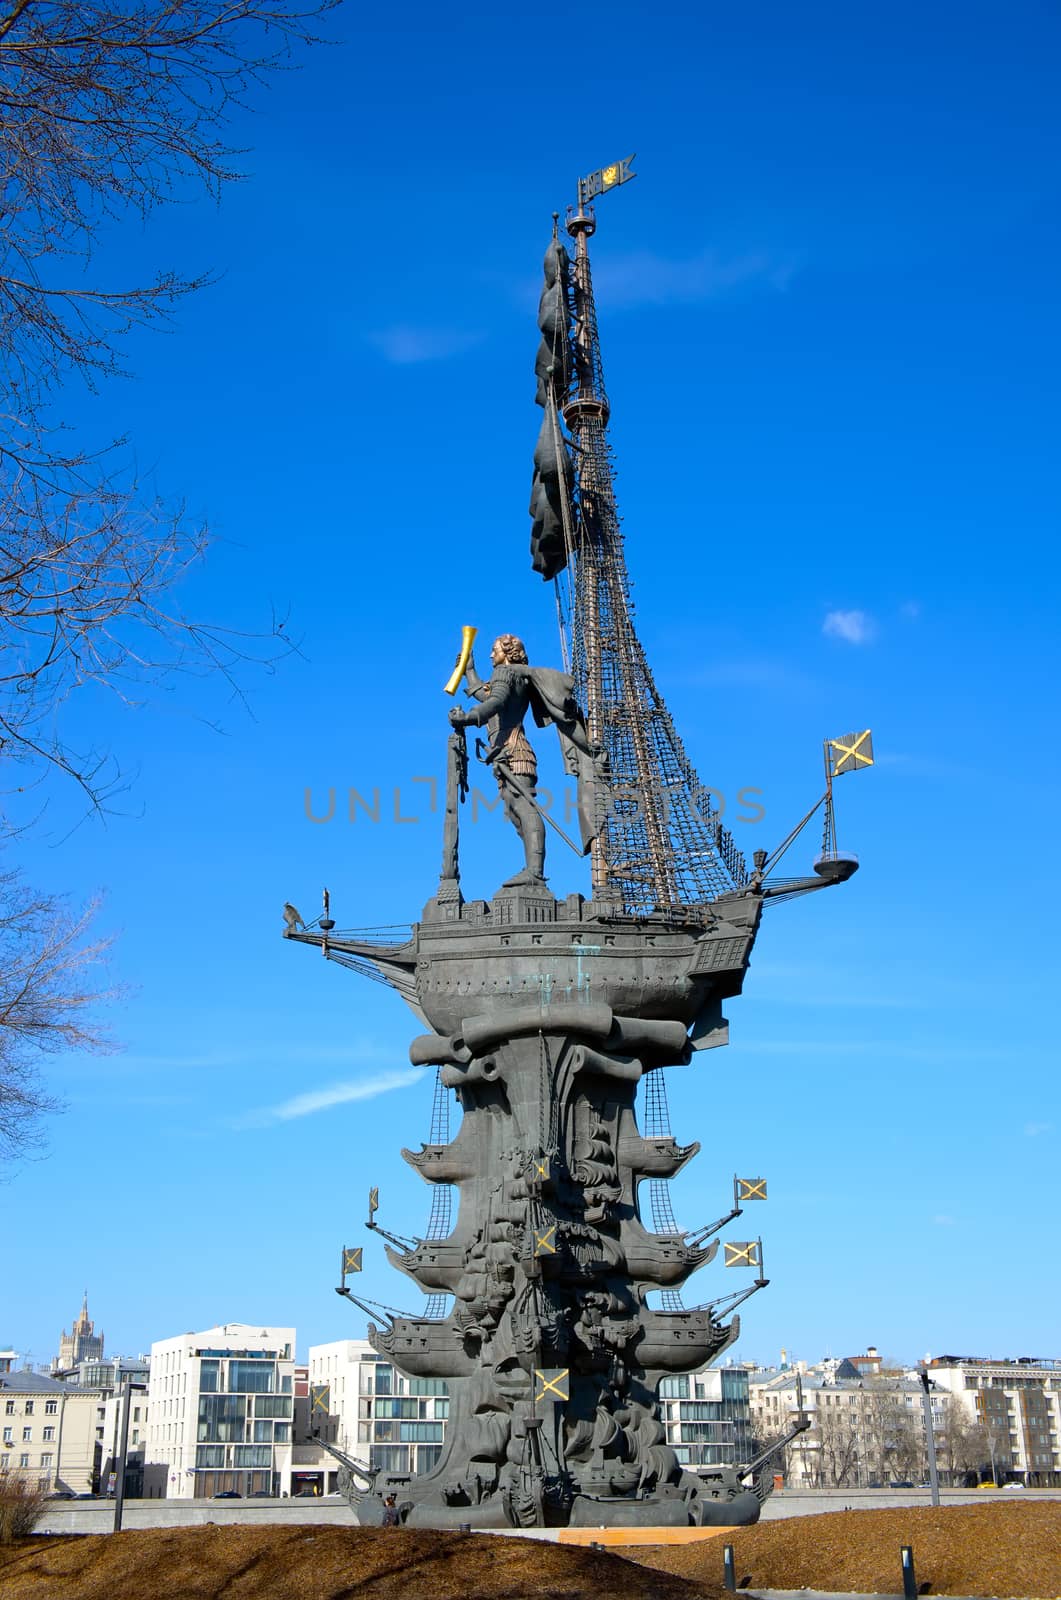 Peter the Great by vagant